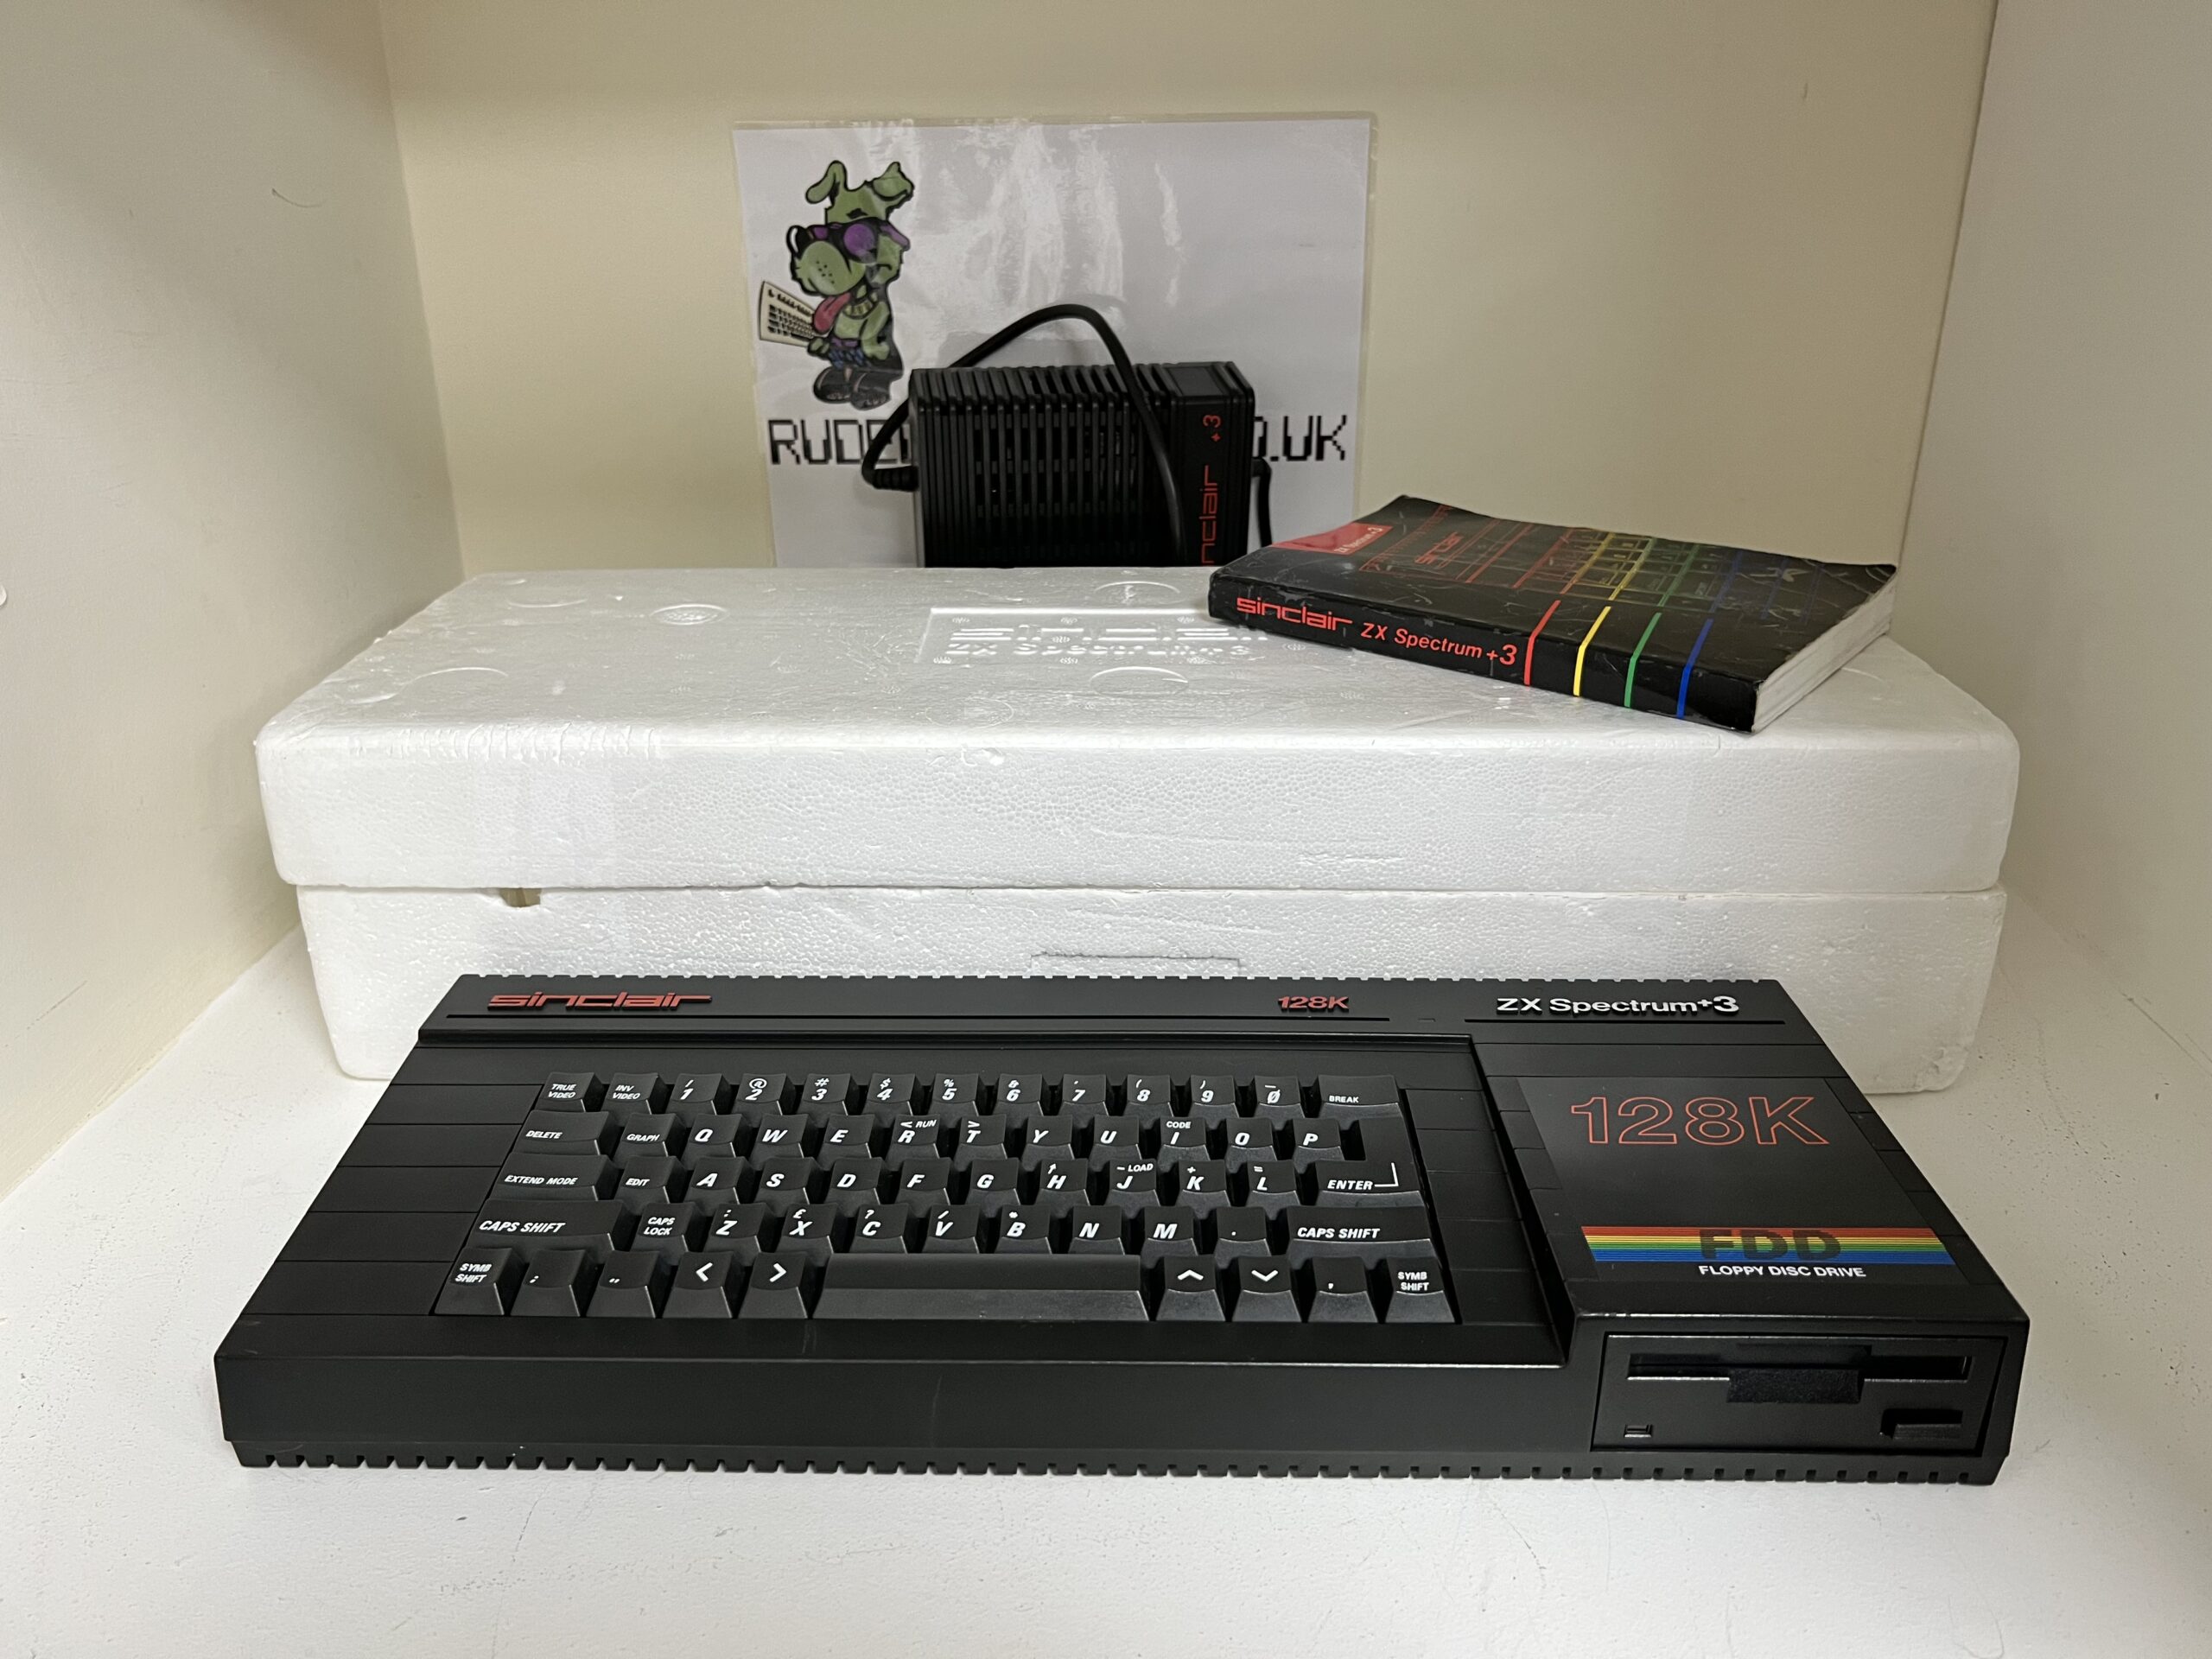 Sinclair ZX Spectrum 128k +3 – Refurbished, with PSU, manual and 